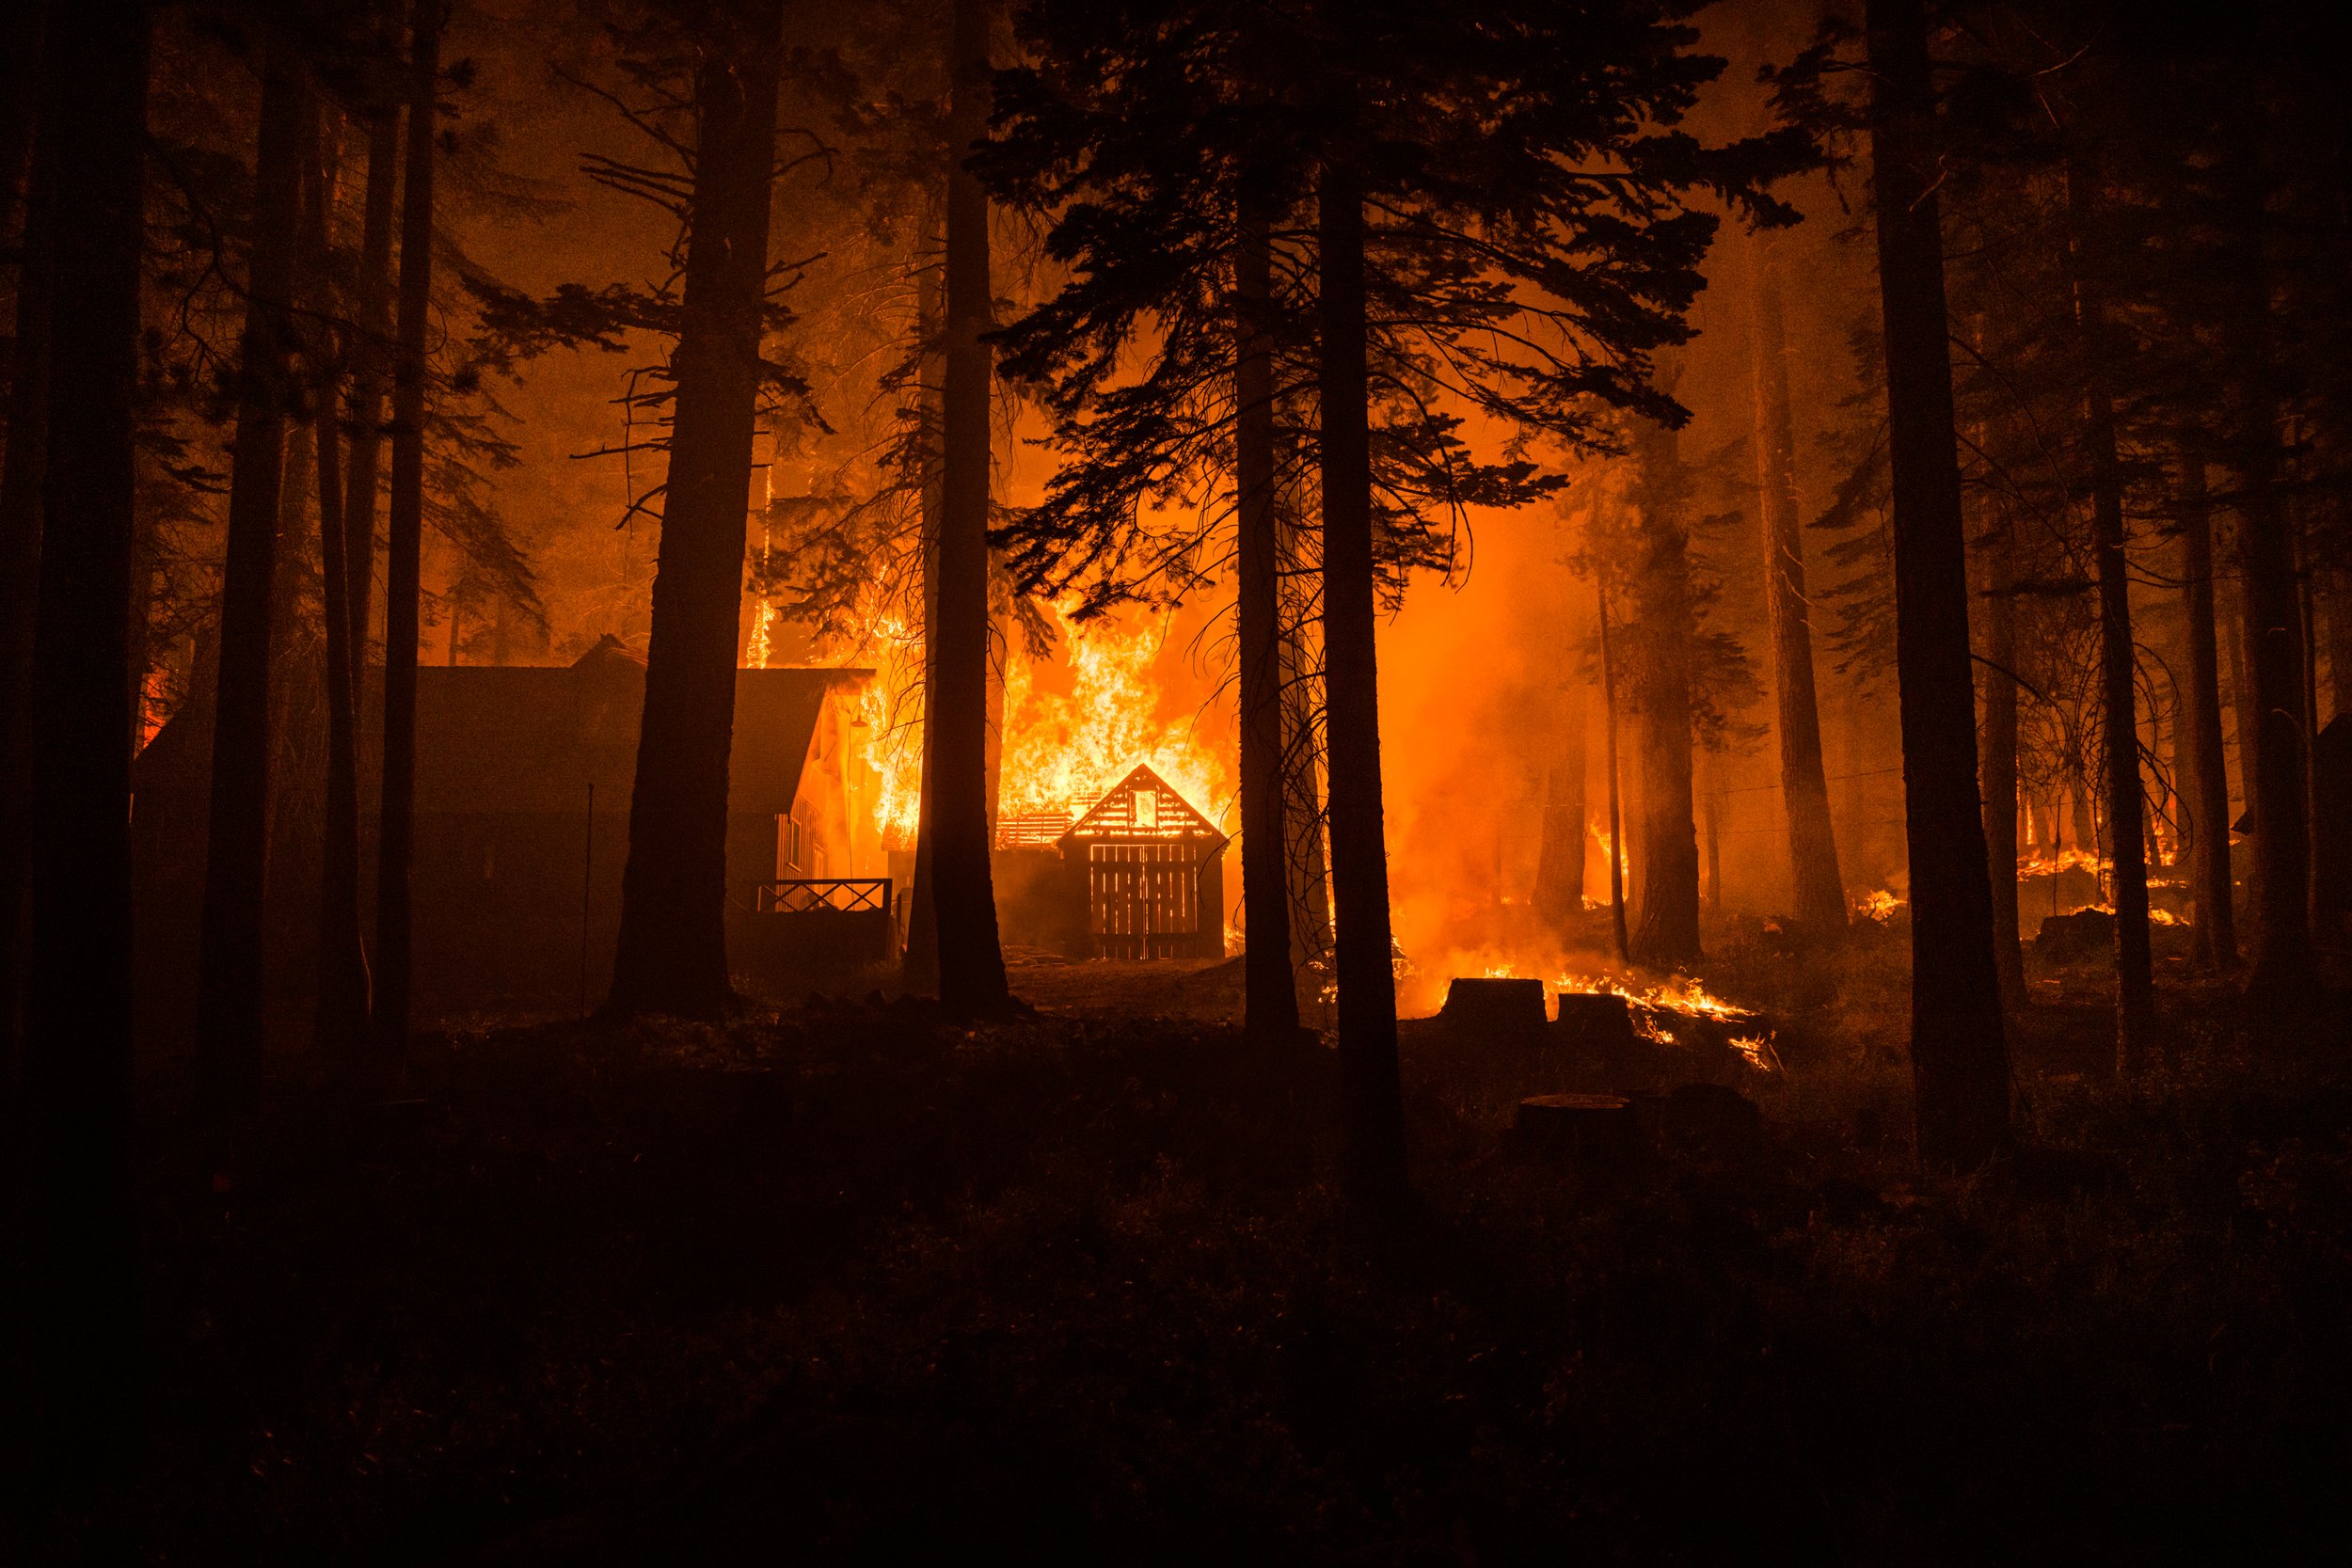  The Calfor fire rips through the canyon from Strawberry Lodge toward Lake Tahoe basin, in California, as firefighters with CAL FIRE and other fire departments try to protect homes and shelters across the area, August 29, 2021.Jamie bardwell 26 from 